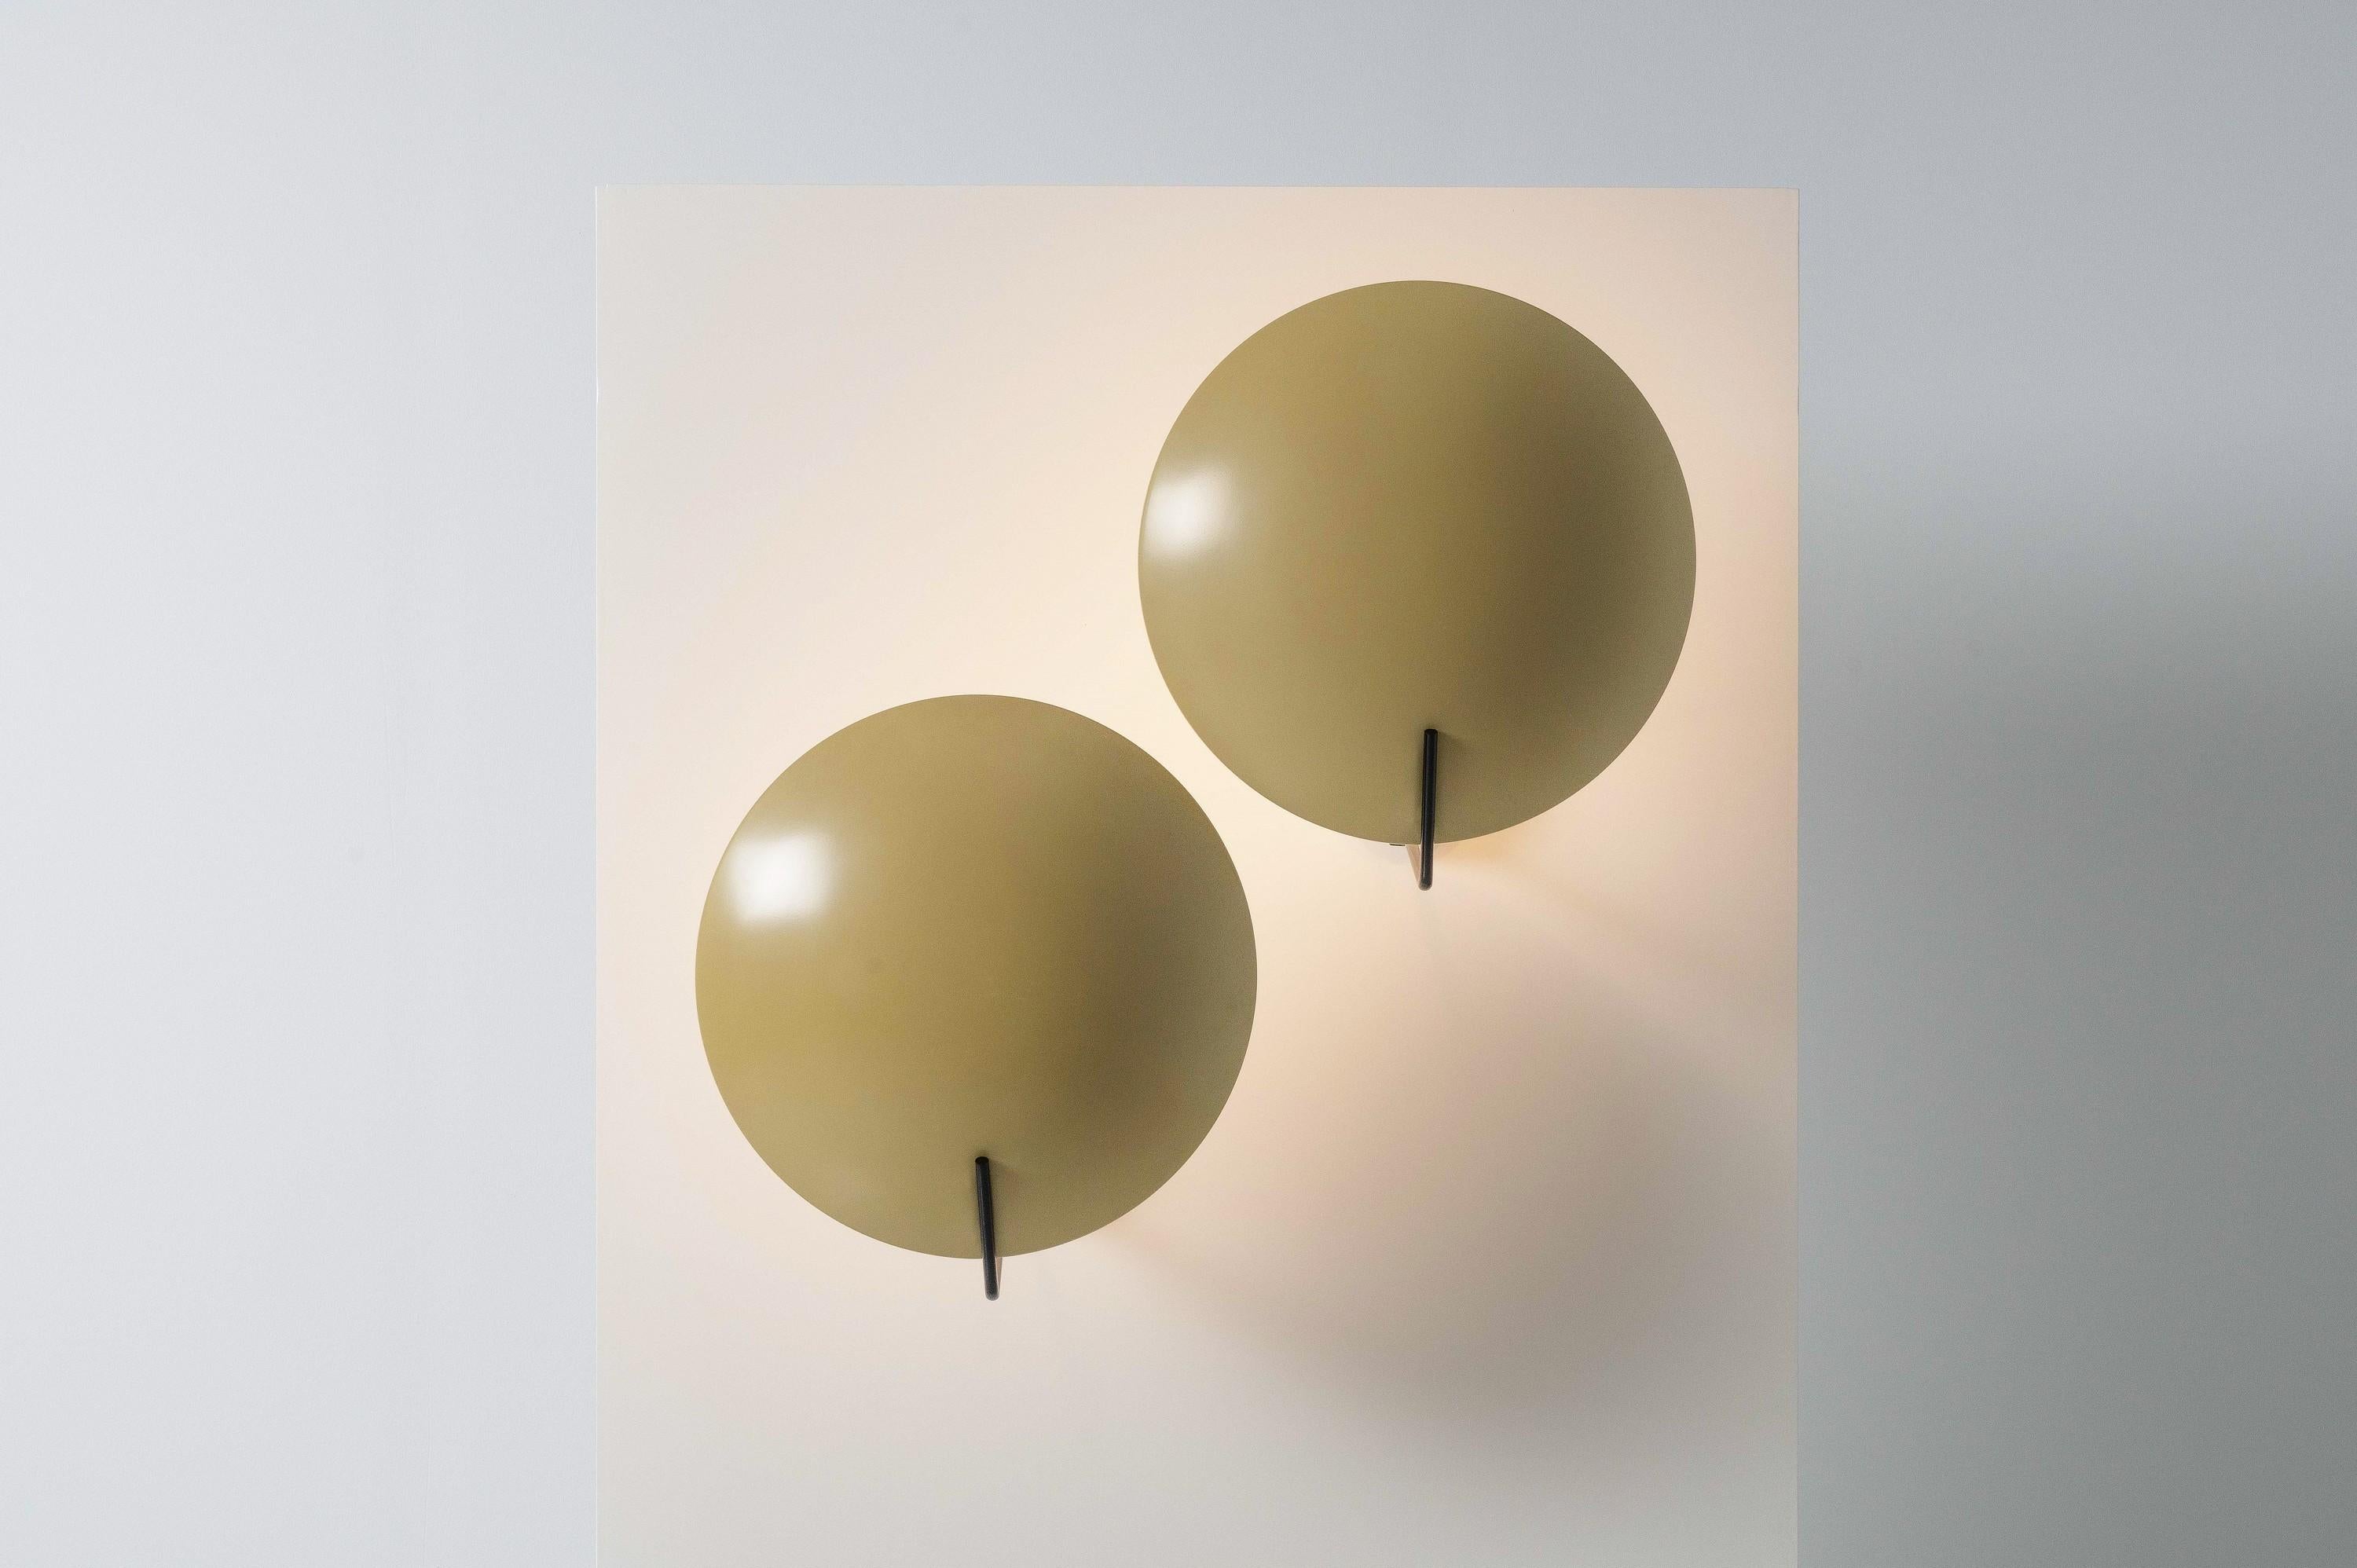 Nice and large pair of 'Model 232' wall lamps, designed by Bruno Gatta and produced in Italy by Stilnovo in 1955. These lamps are in fantastic and original condition and hard to find in a set like these, and have remained undamaged during their long